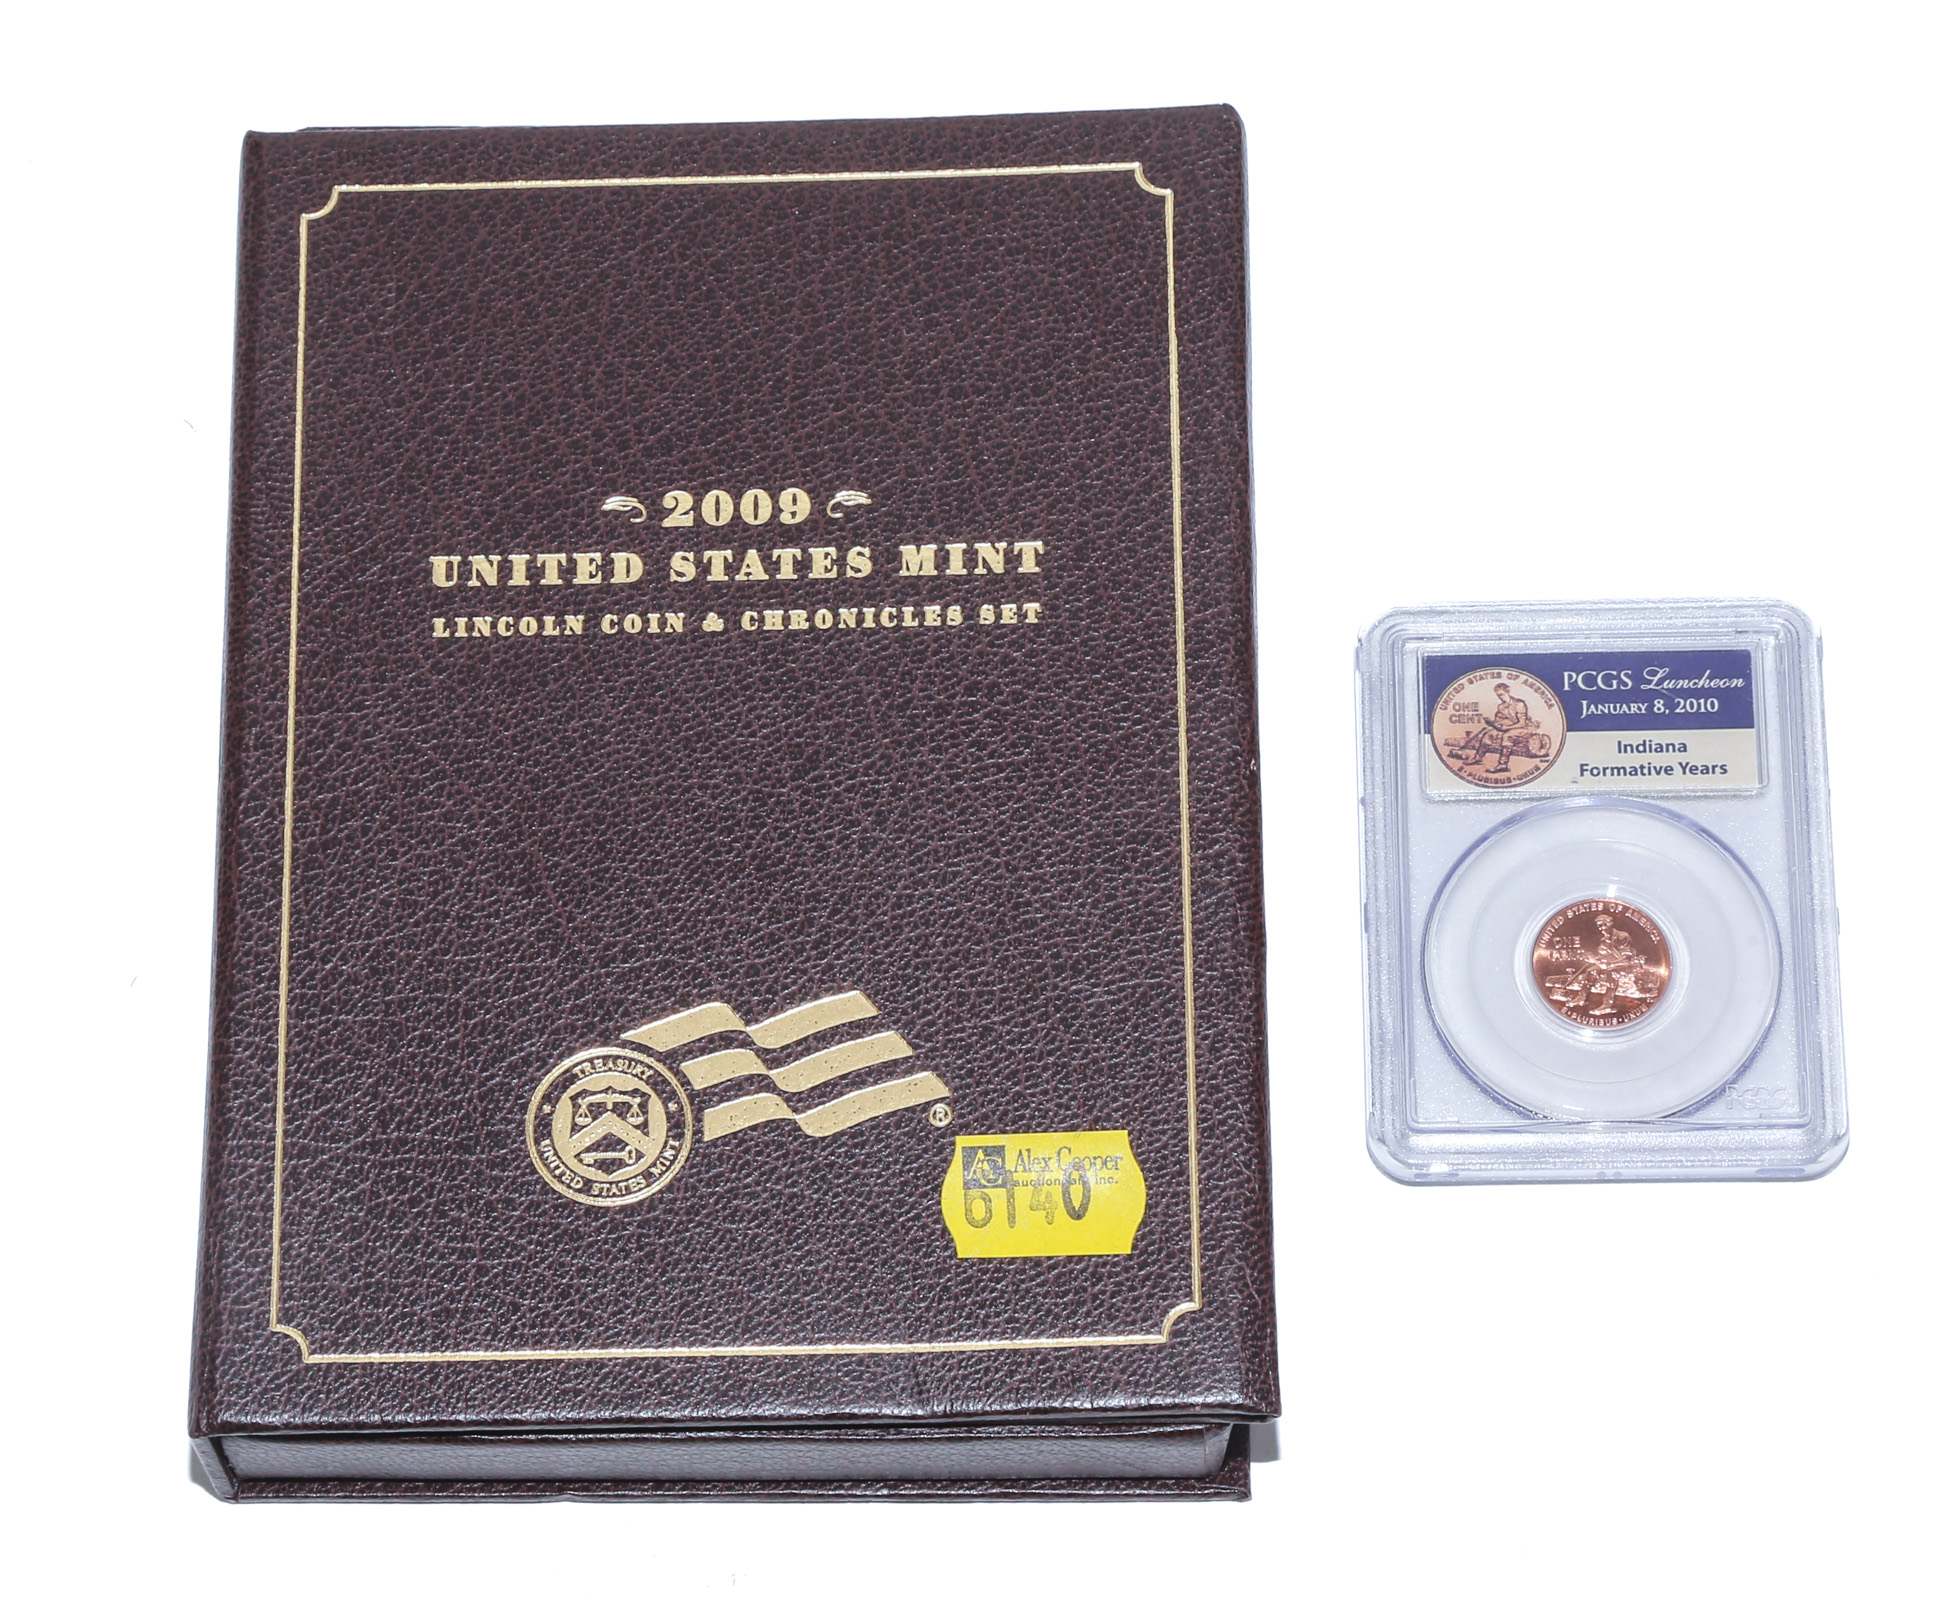 2009 LINCOLN COIN & CHRONICLES